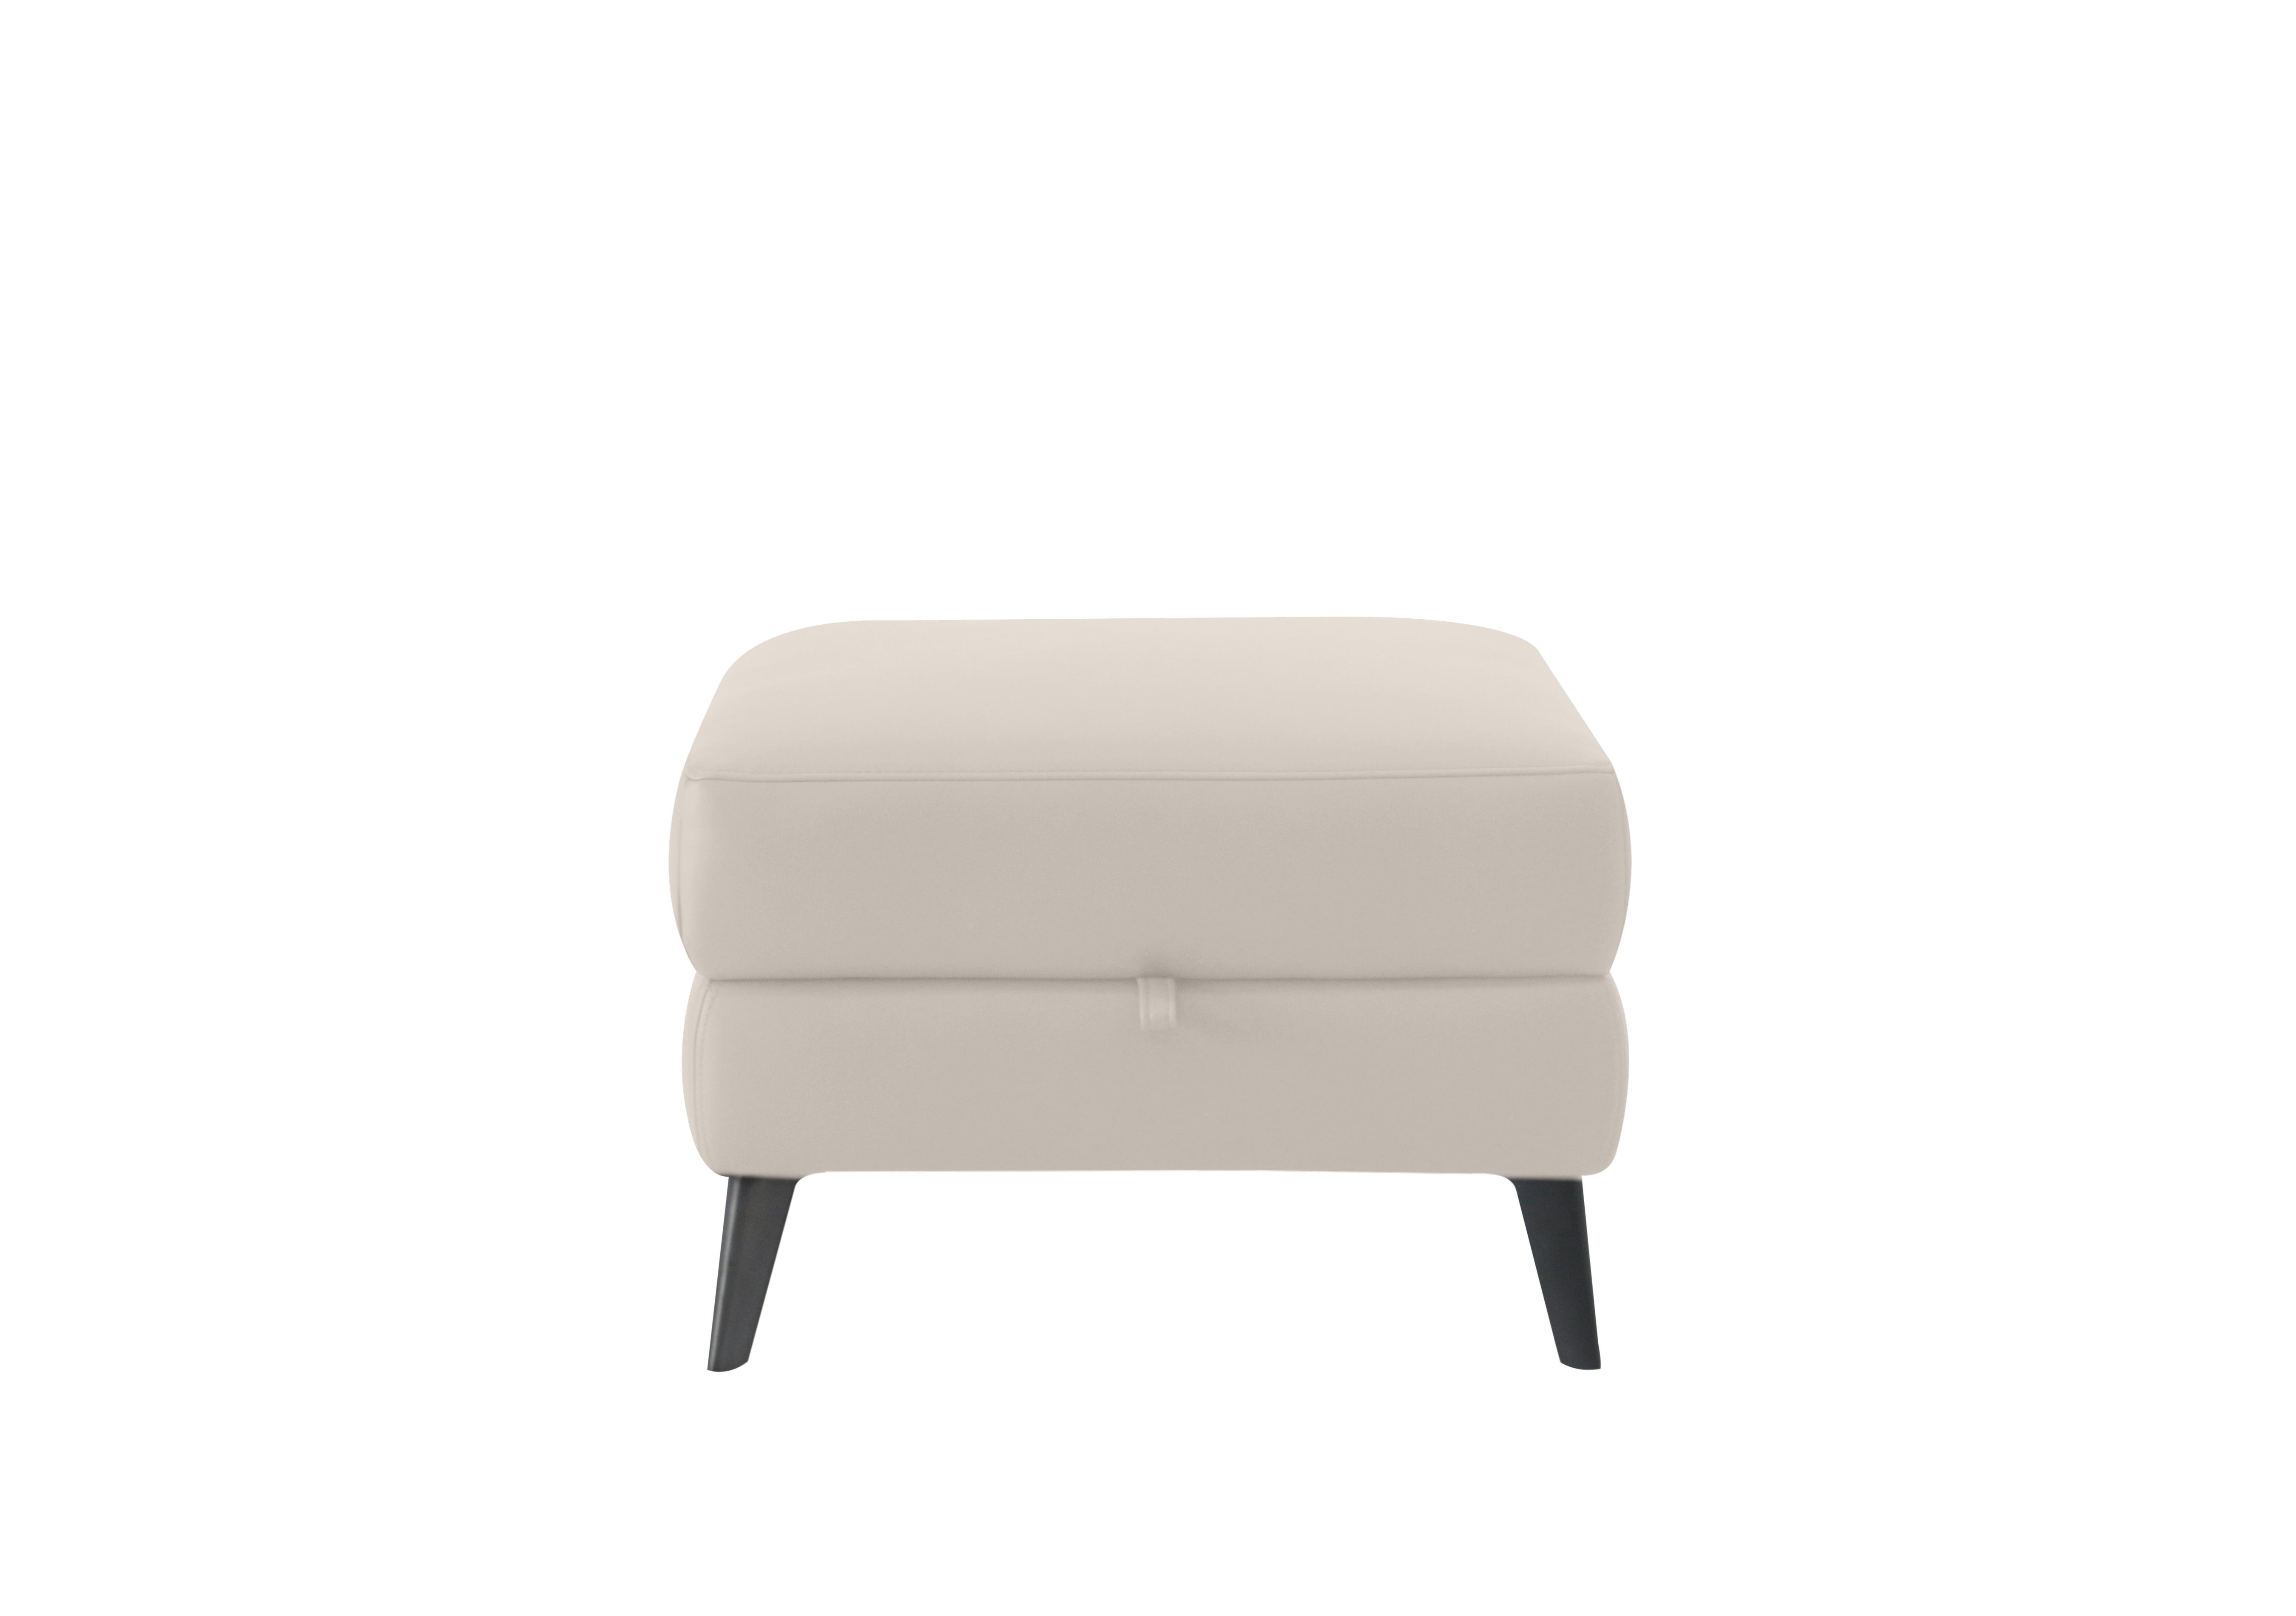 Huxley Leather Storage Footstool in Np-521e Frost on Furniture Village